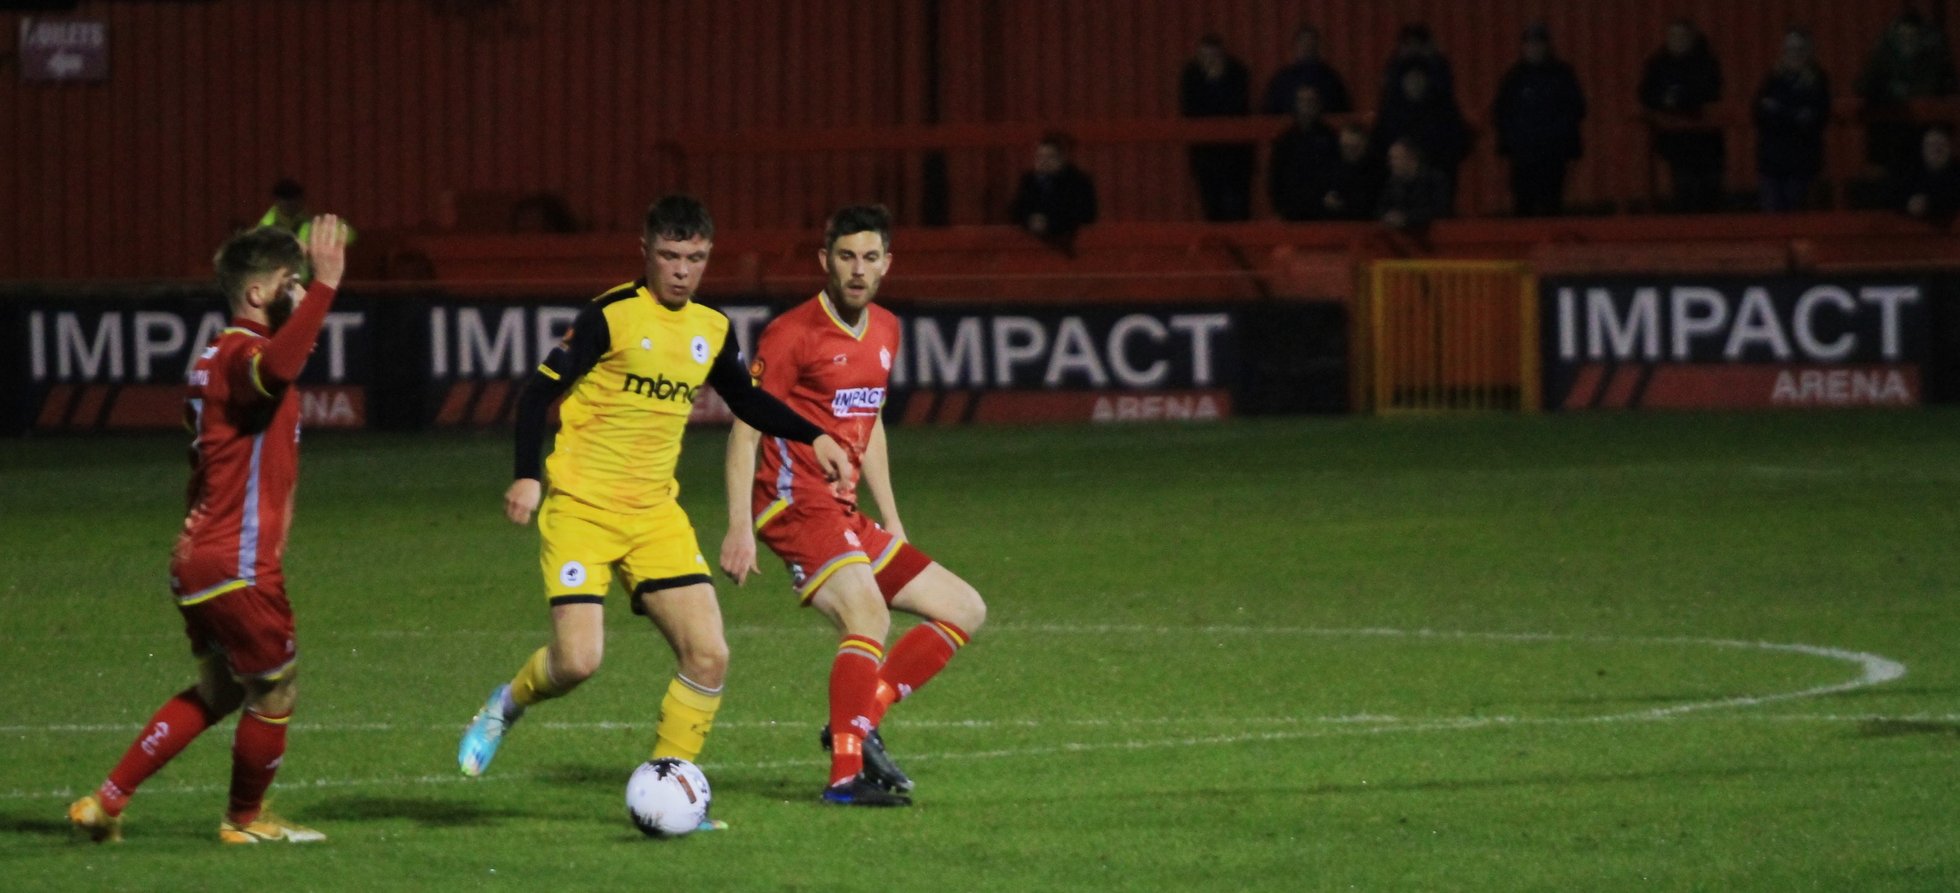 Match report for Alfreton Town vs Chester FC